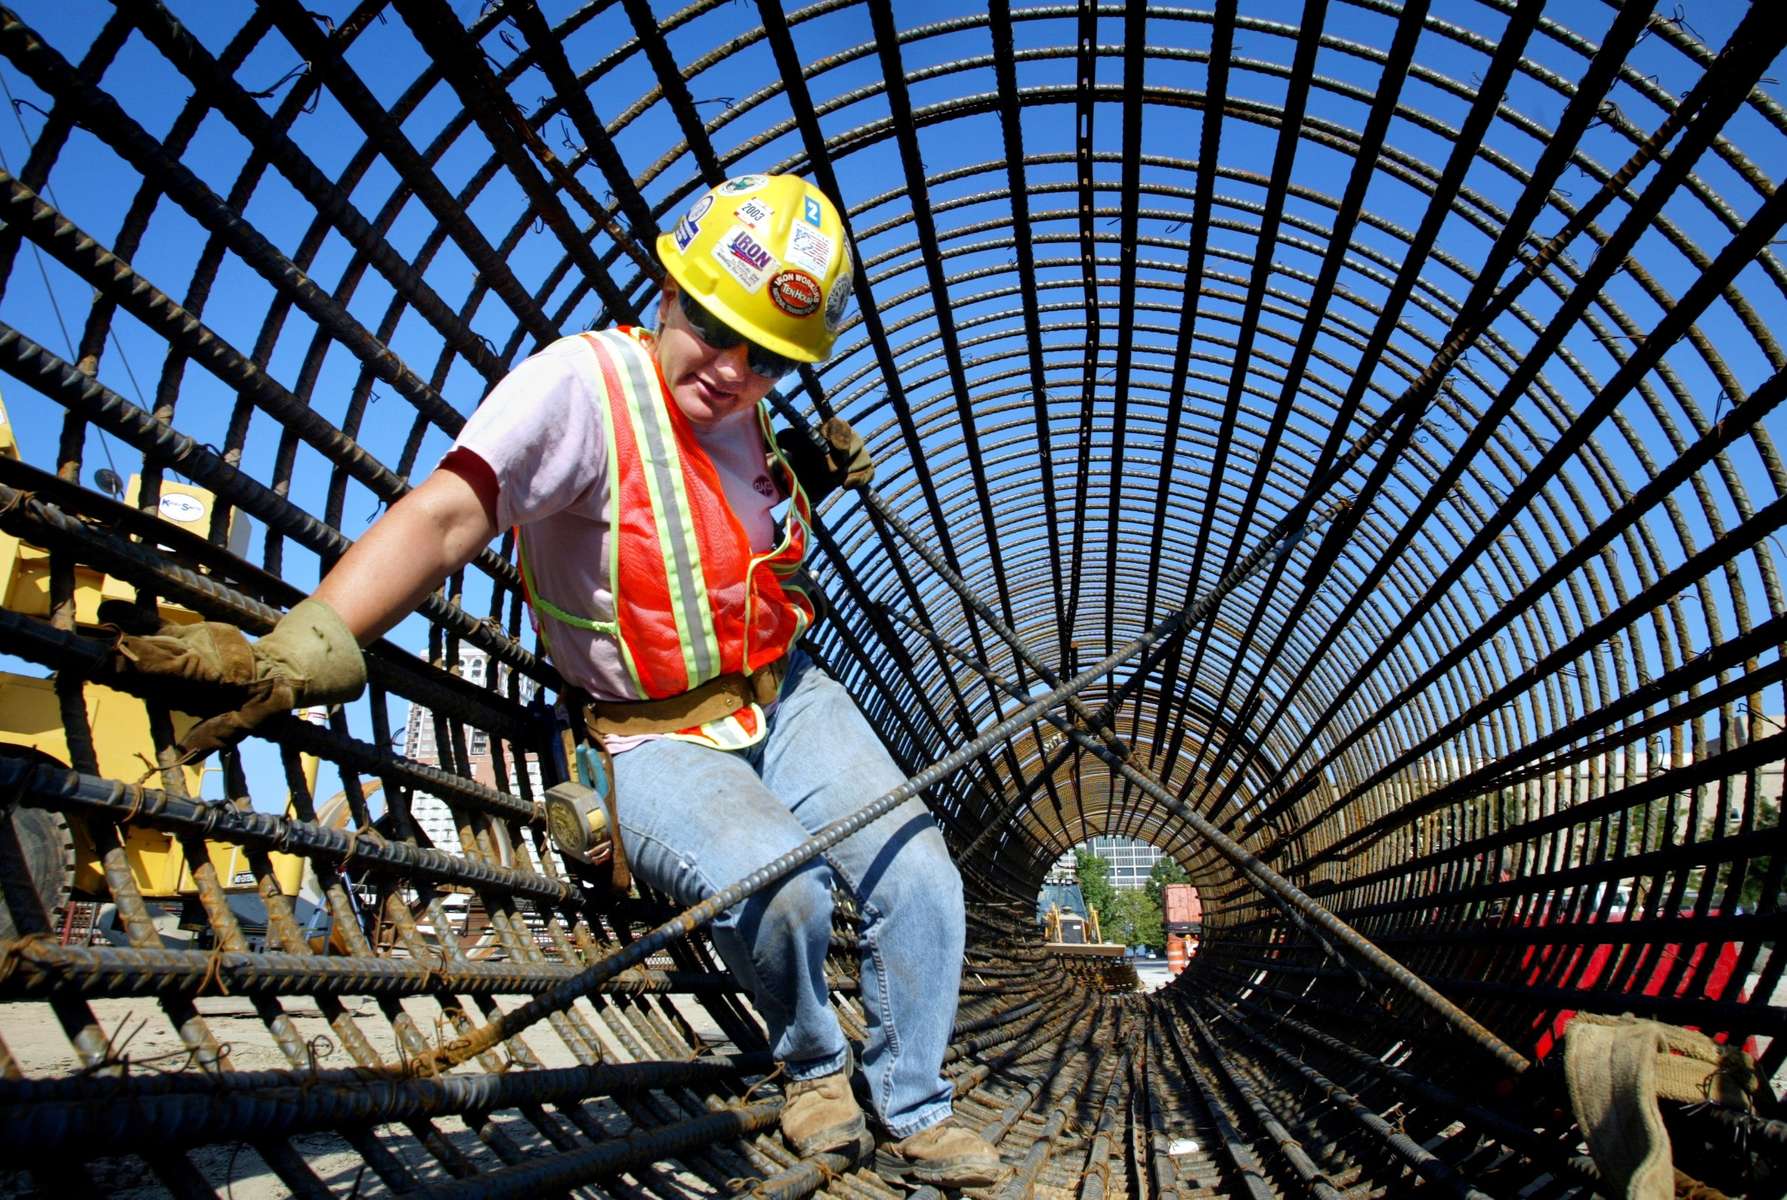 Friday July 25, 2003--Local 396 Iron Worker Crystal Farris, of Bourbon, Mo., climbs out of a rebar cage that will be sunk into the ground and filled with concrete to create the foundation for a bridge in the MetroLink expansion project on Forest Park Parkway.Photo By David Carson/PD